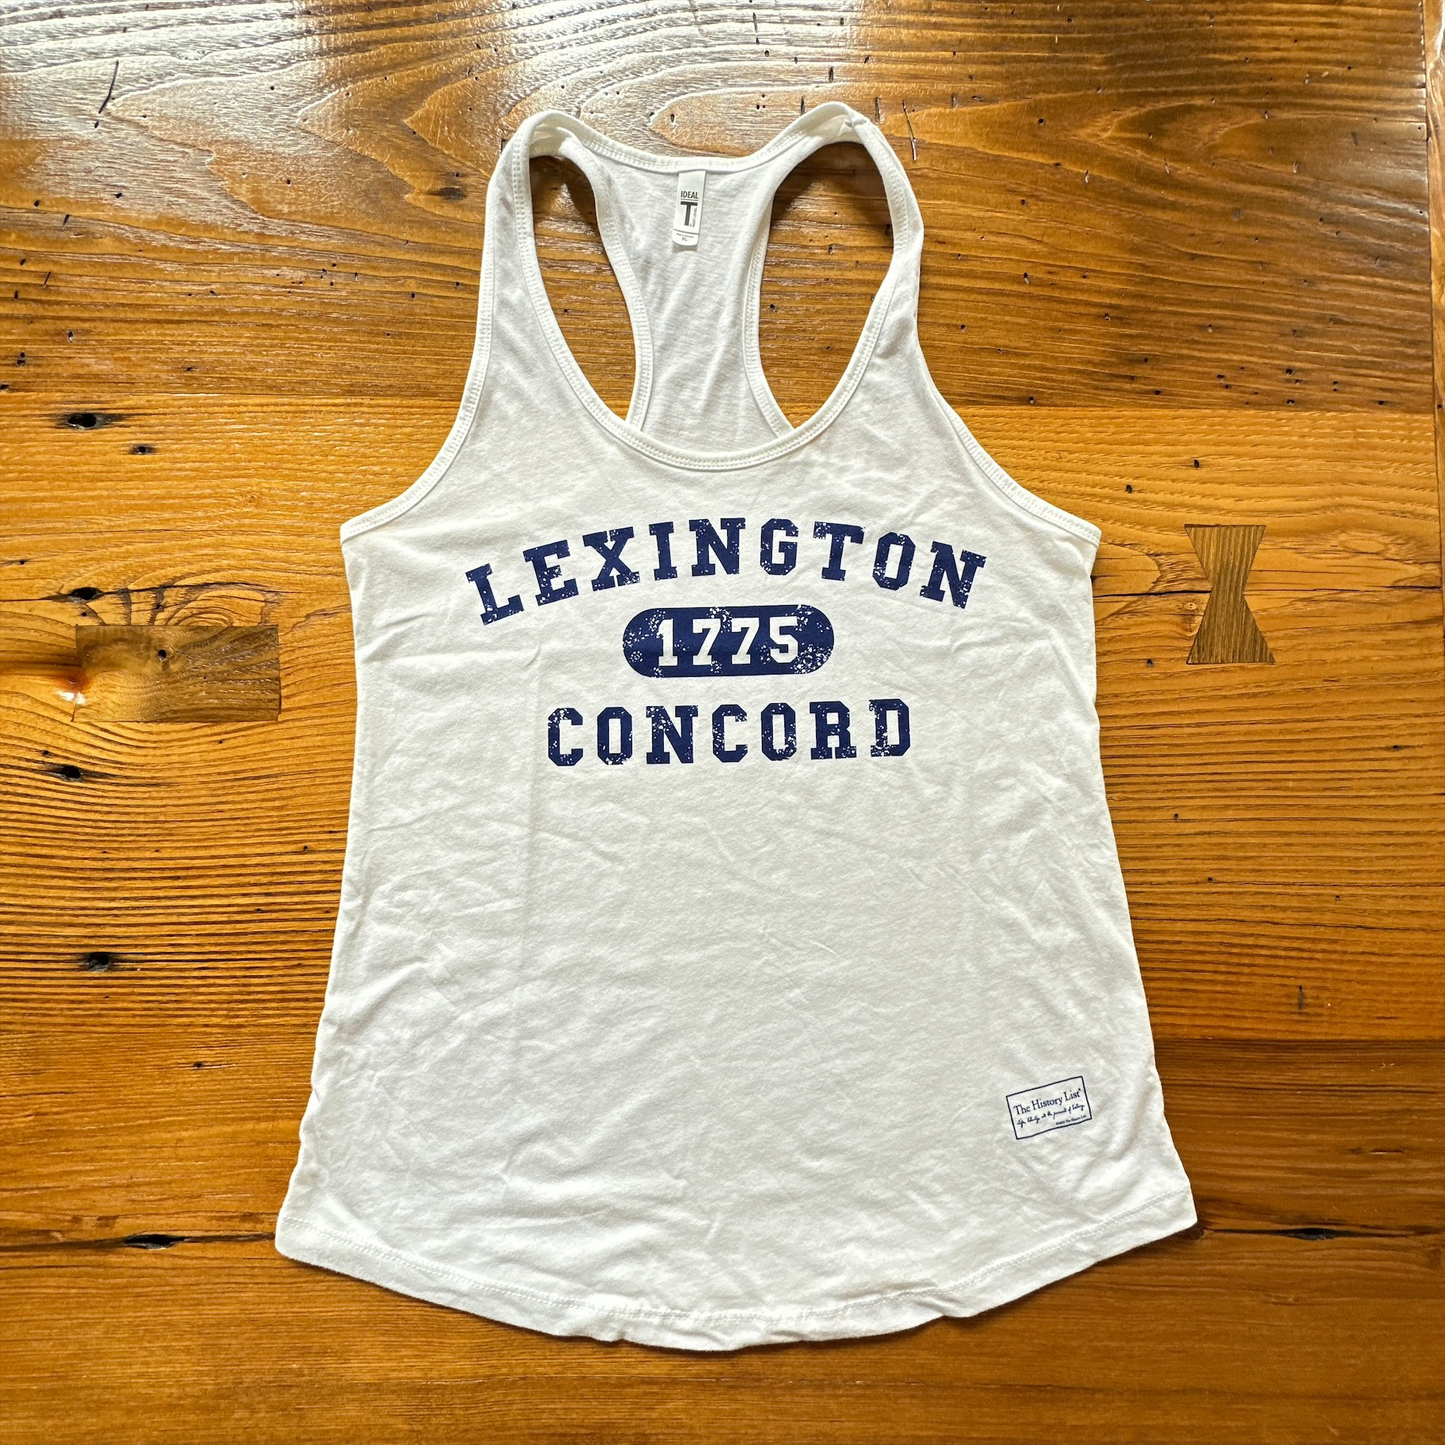 1775 Lexington and Concord Tank top for women